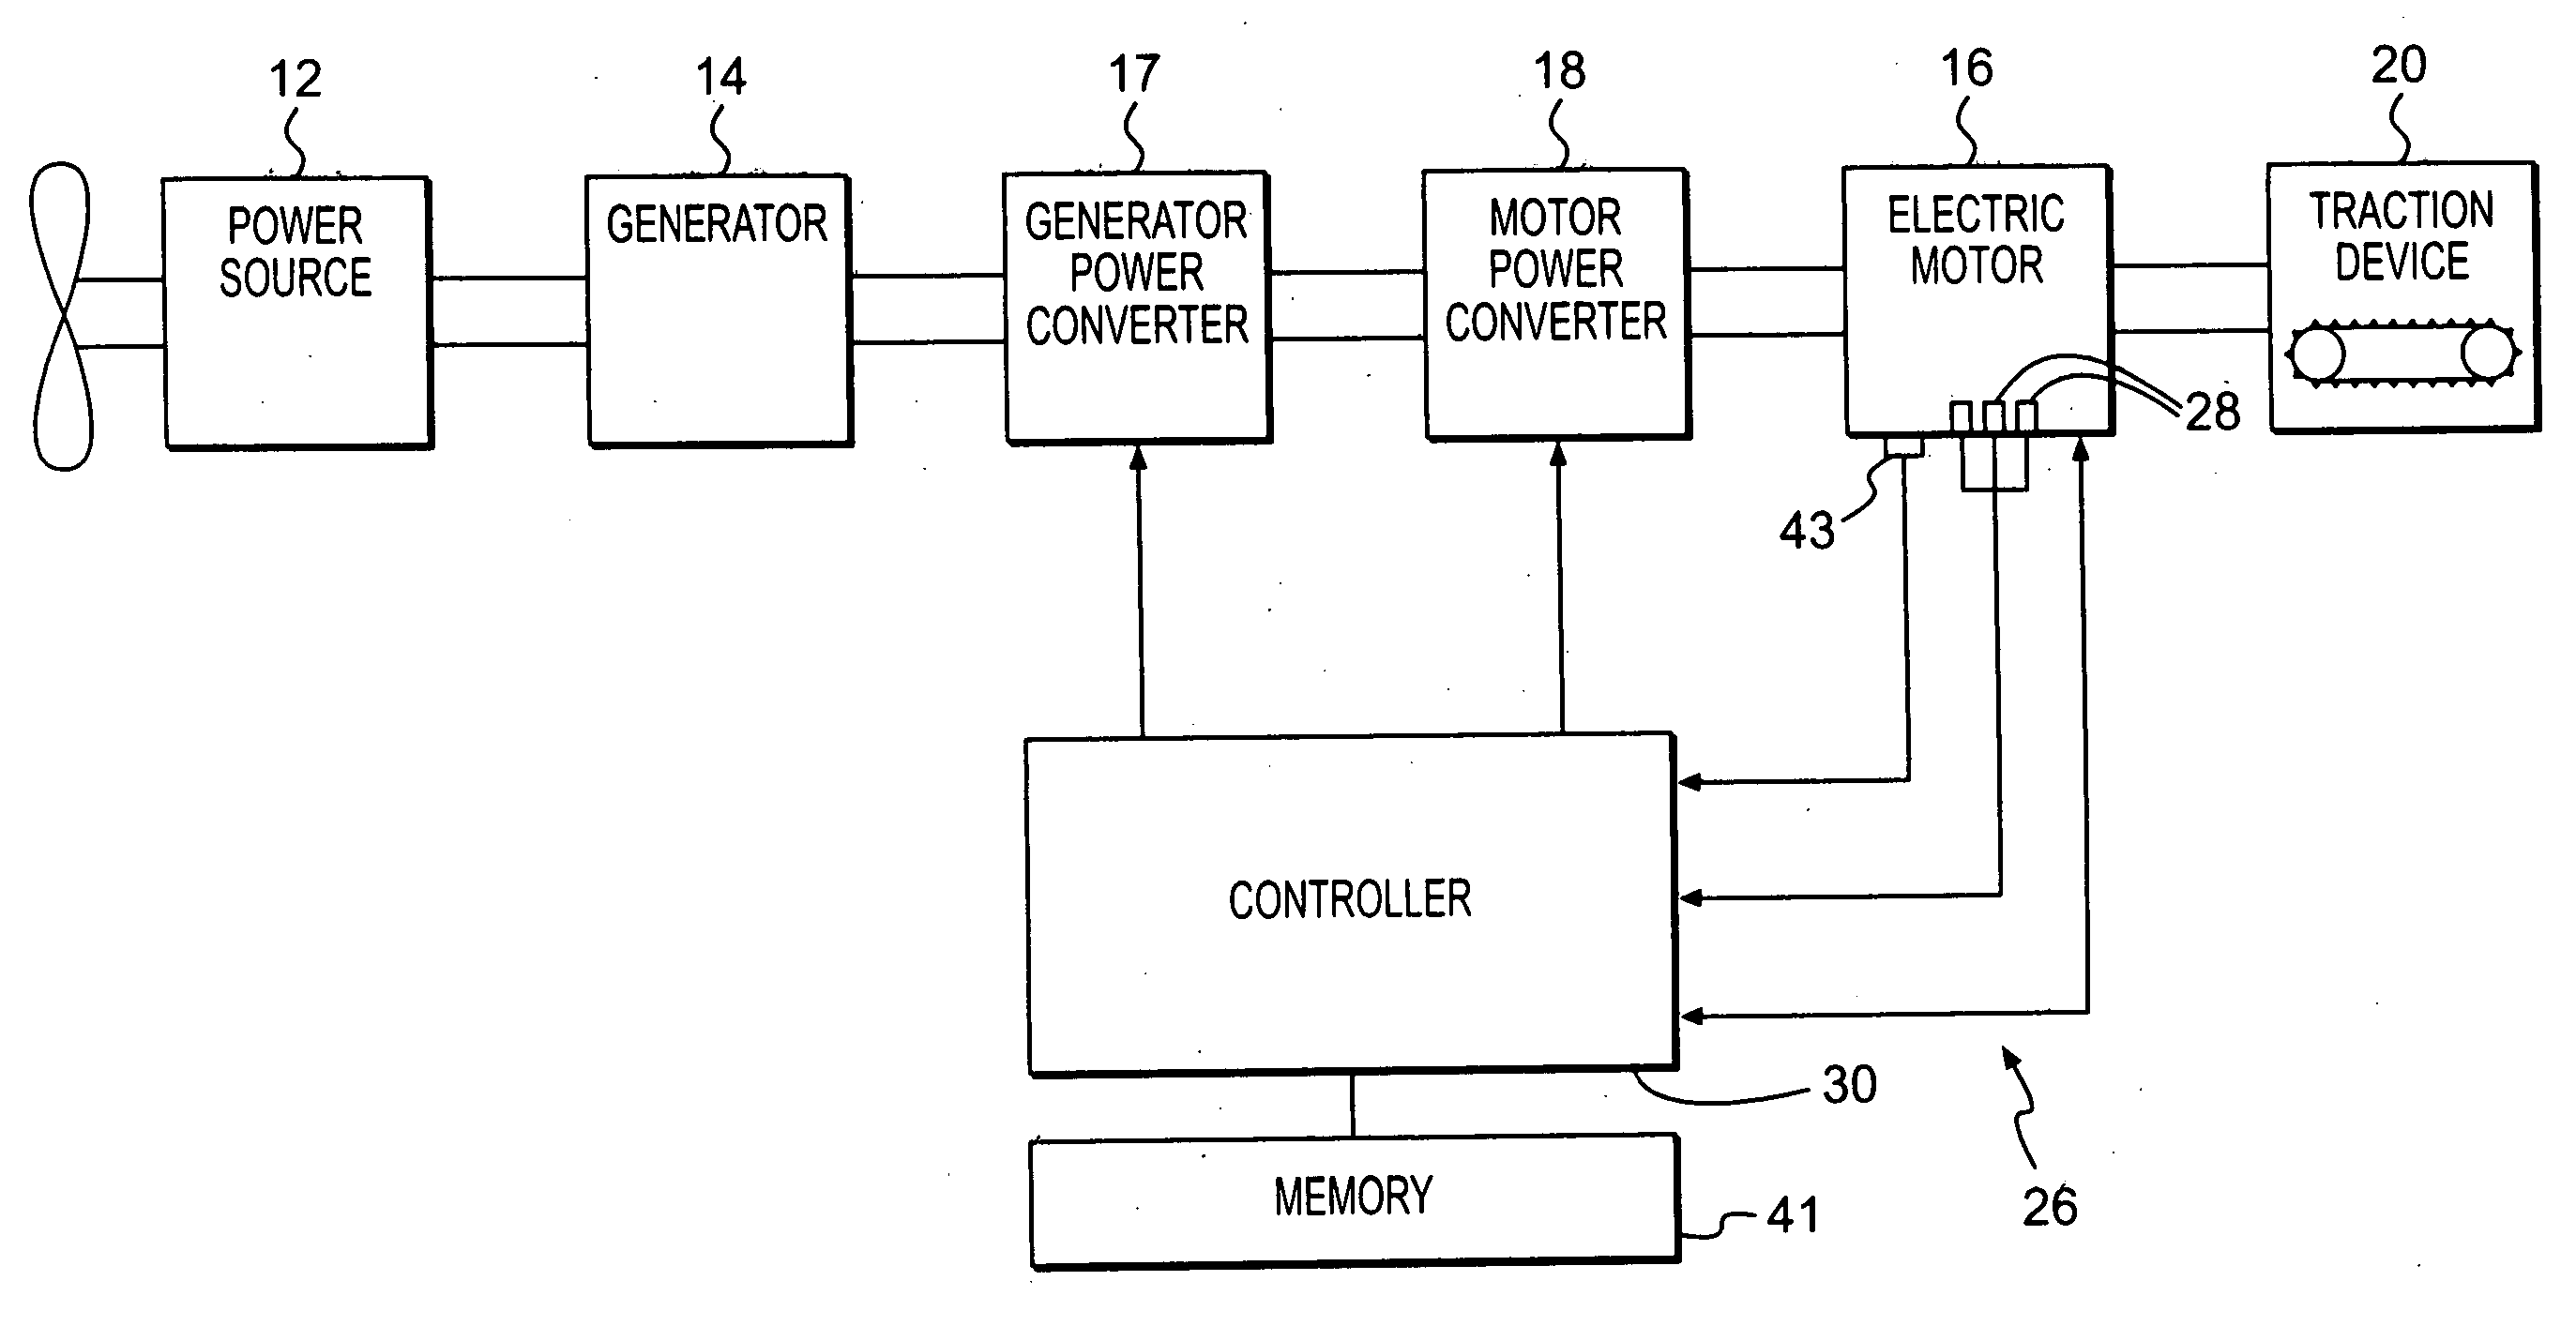 Overload protection system for an electrical device